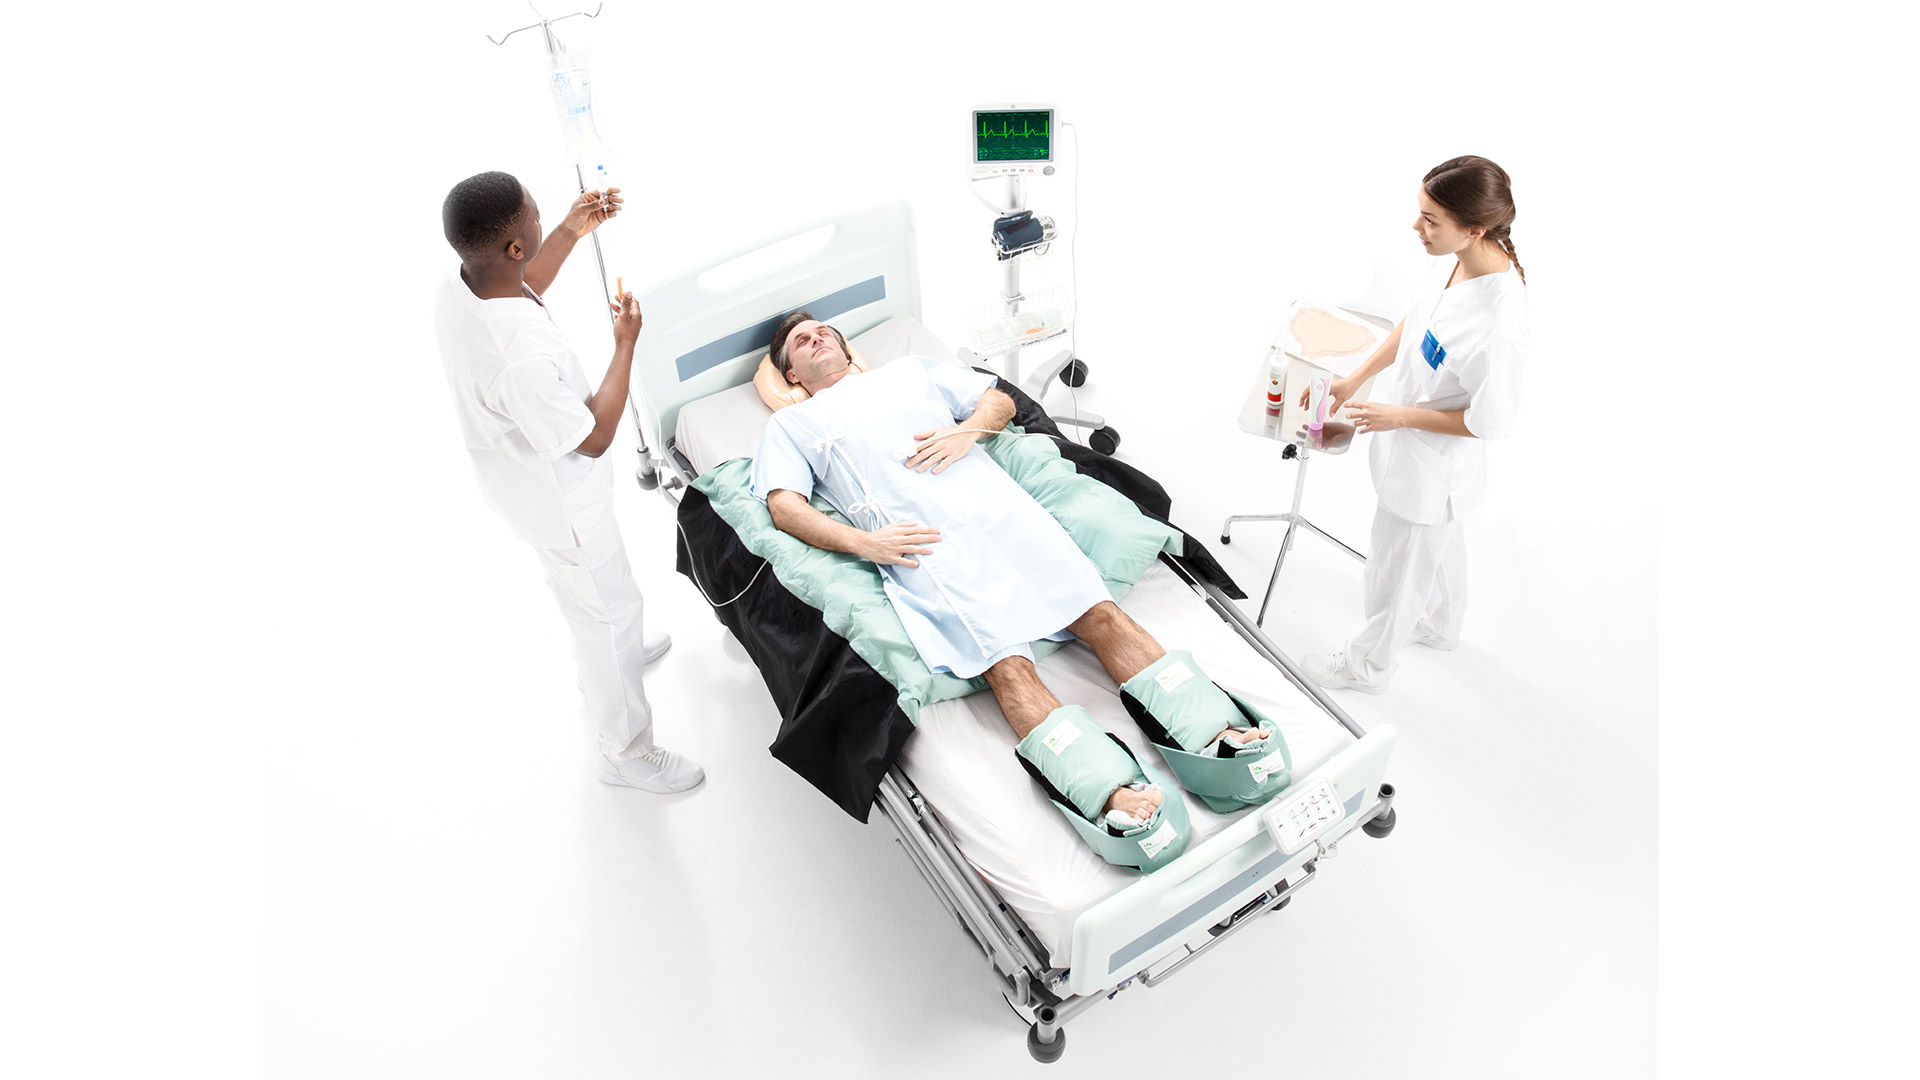 http://www.molnlycke.com/contentassets/48b187d2f4224a3aa74eeda05f1d58d1/patient-with-turning-positioning-systems.jpg